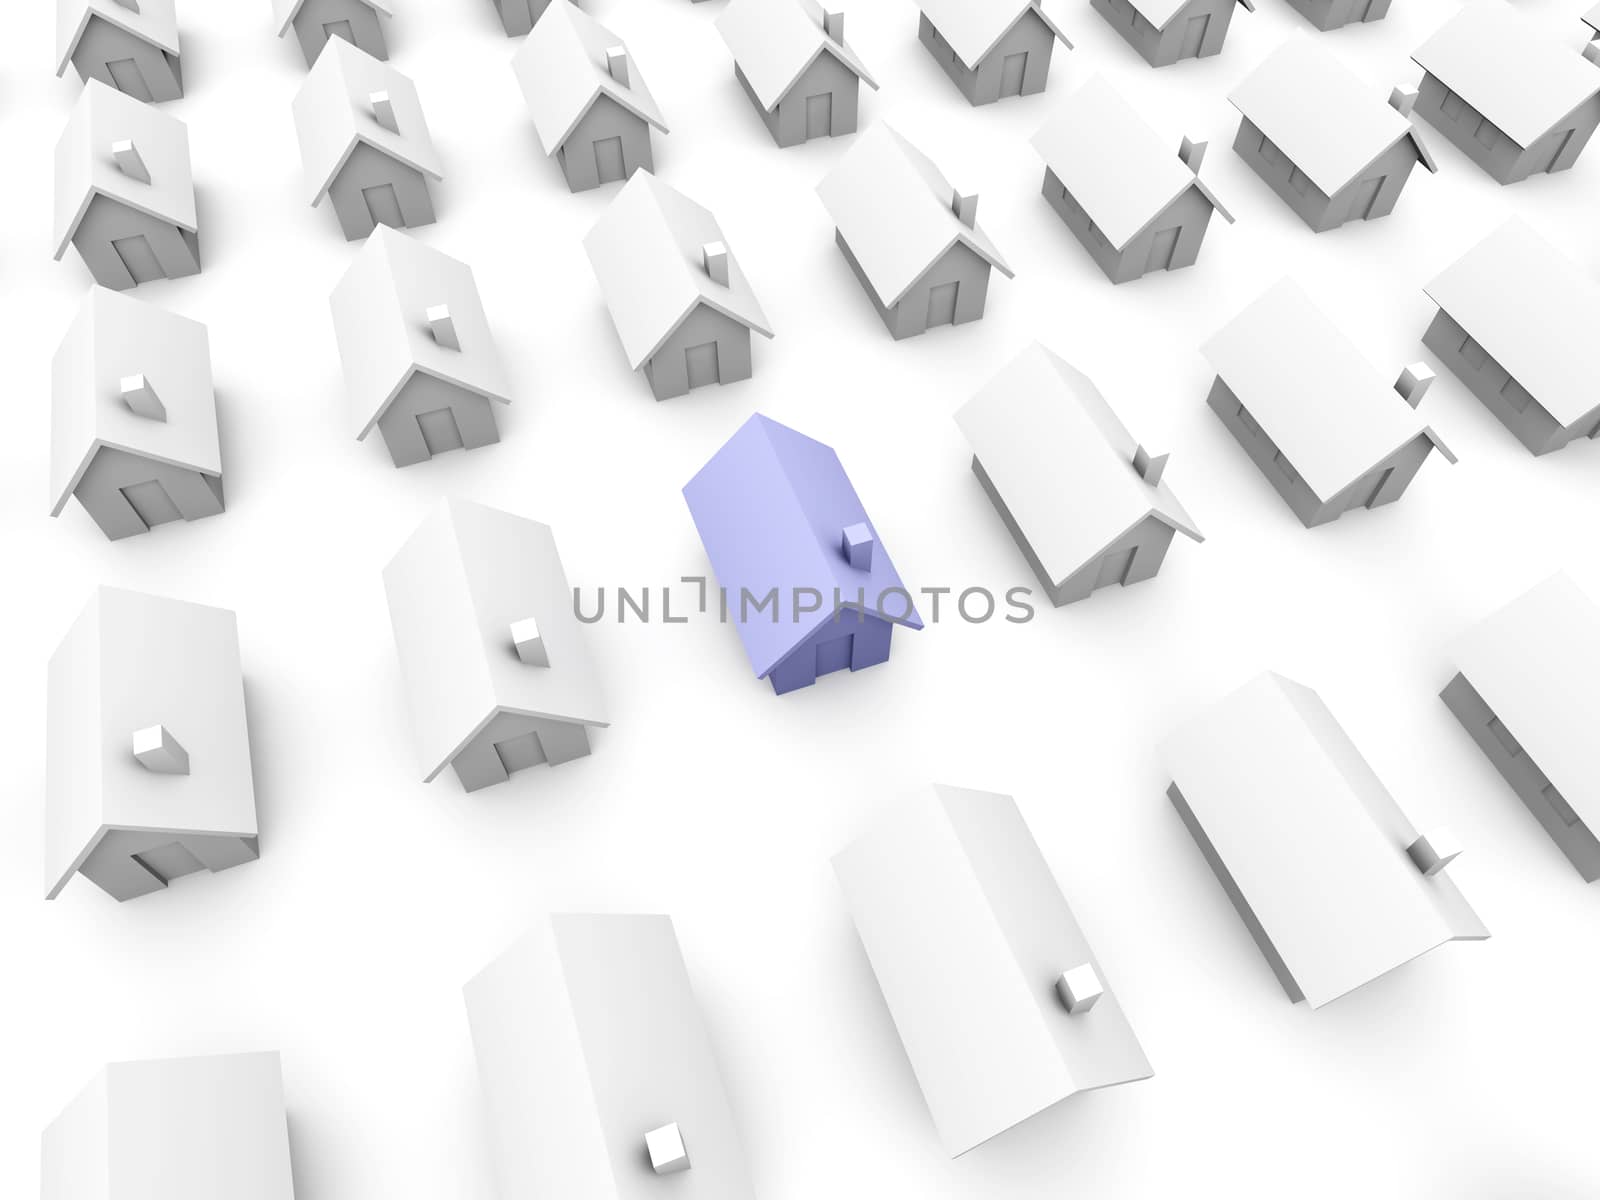 Your special house...
3D rendered Illustration. Isolated on white.